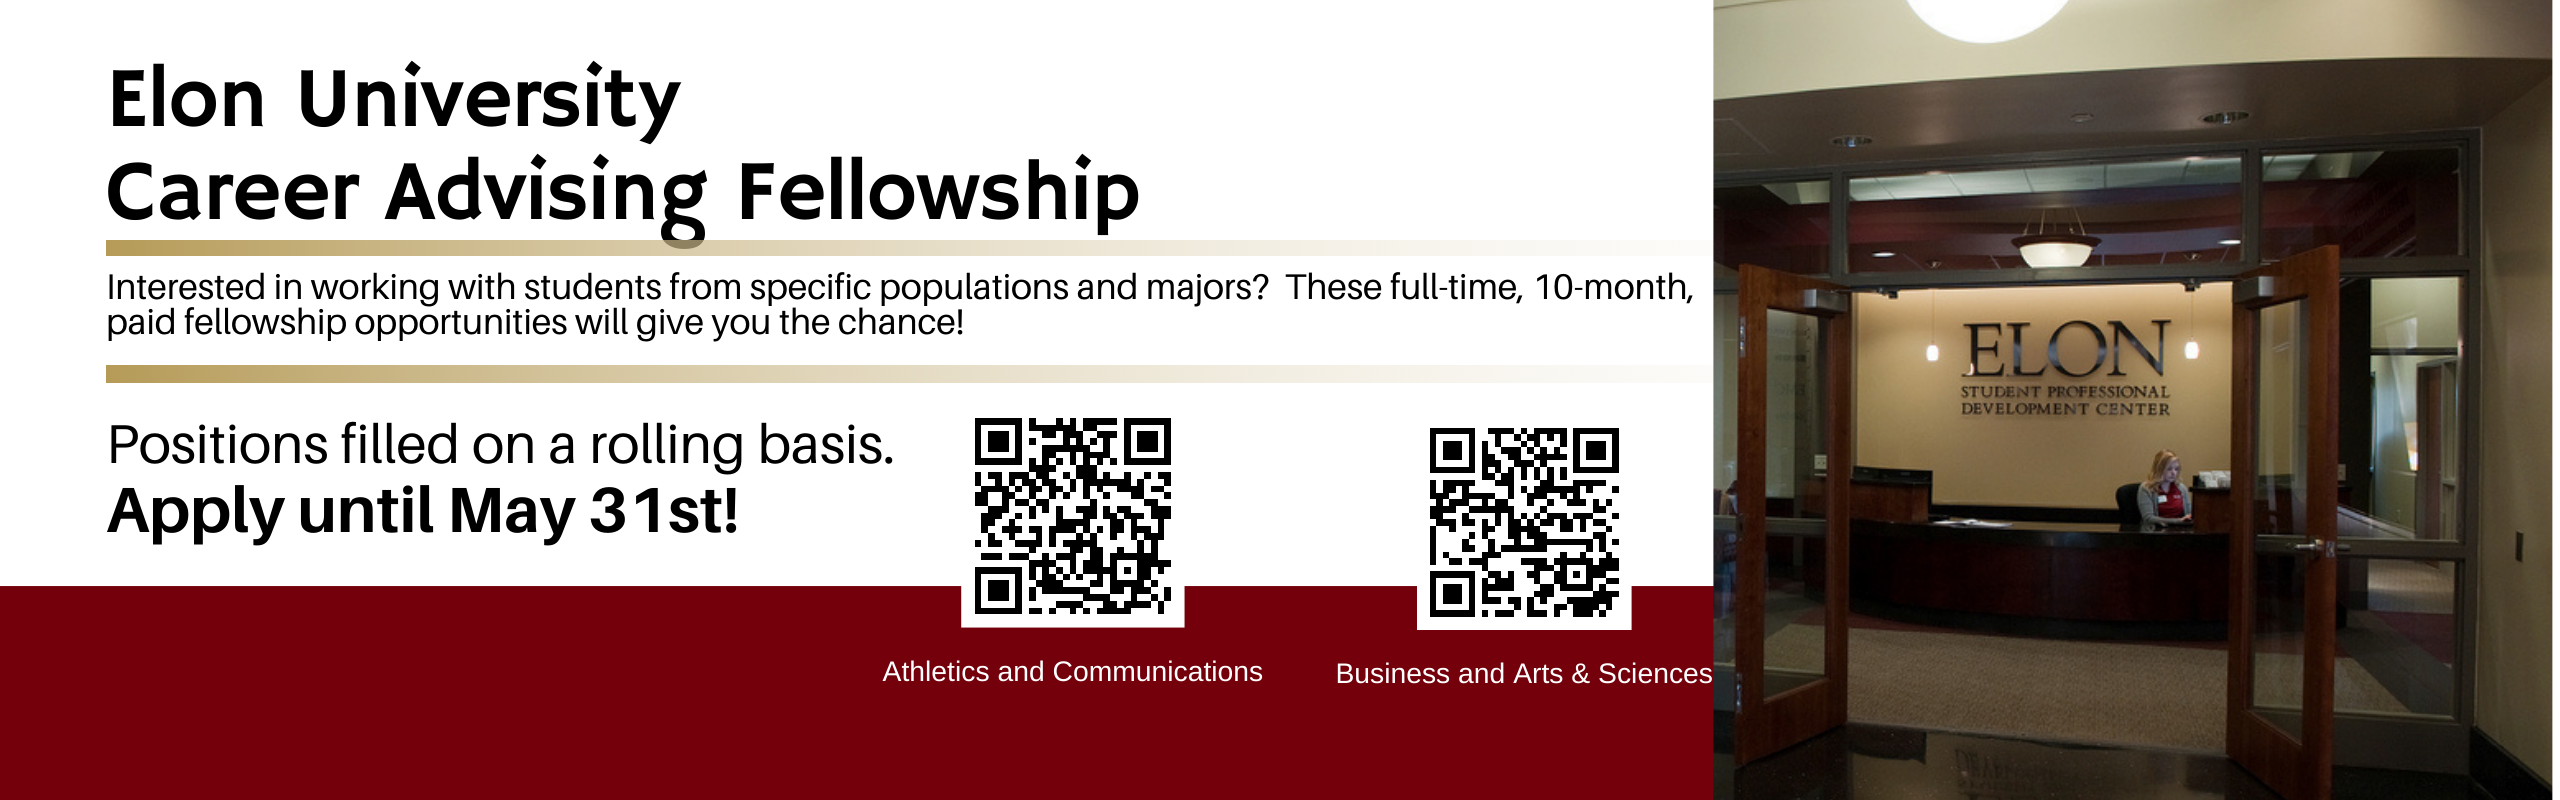 Fellows positions open at Elon apply on careers page at Elon